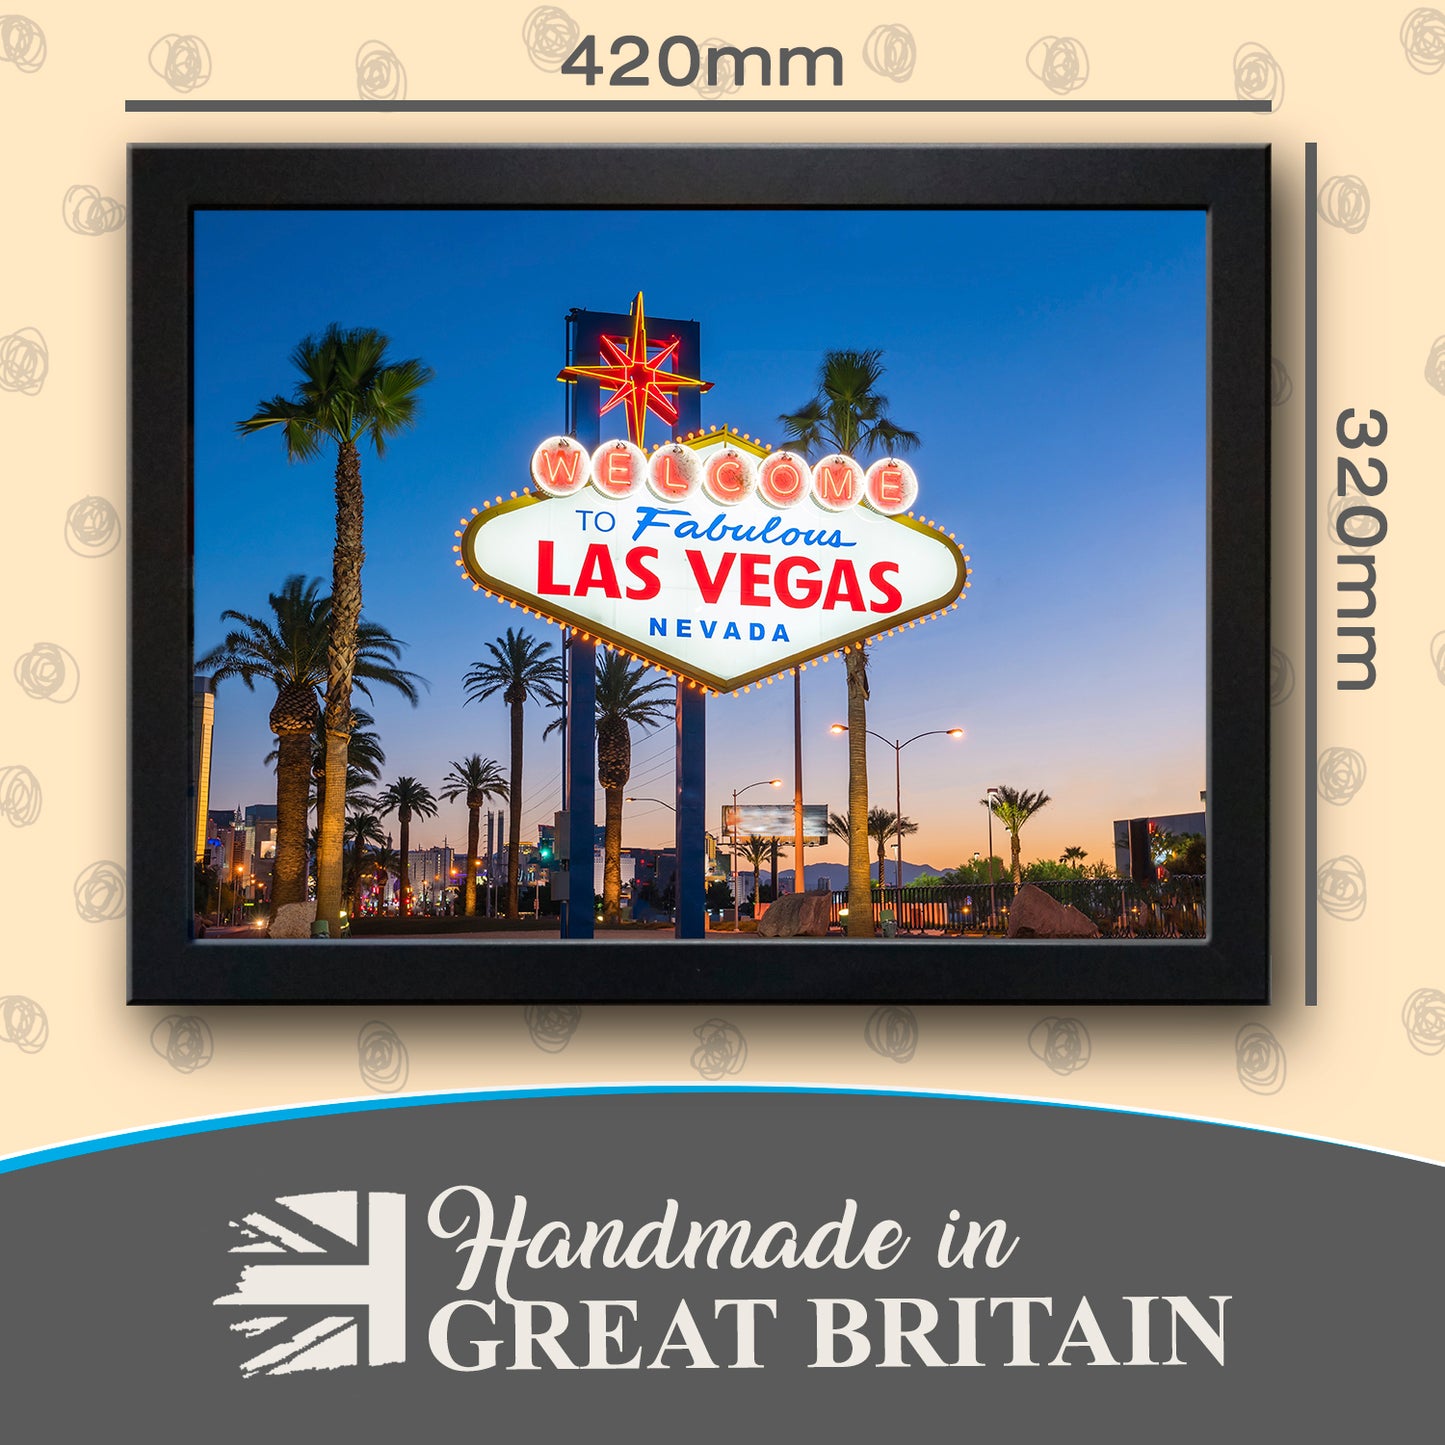 'Welcome to Las Vegas' Sign Cushioned Lap Tray